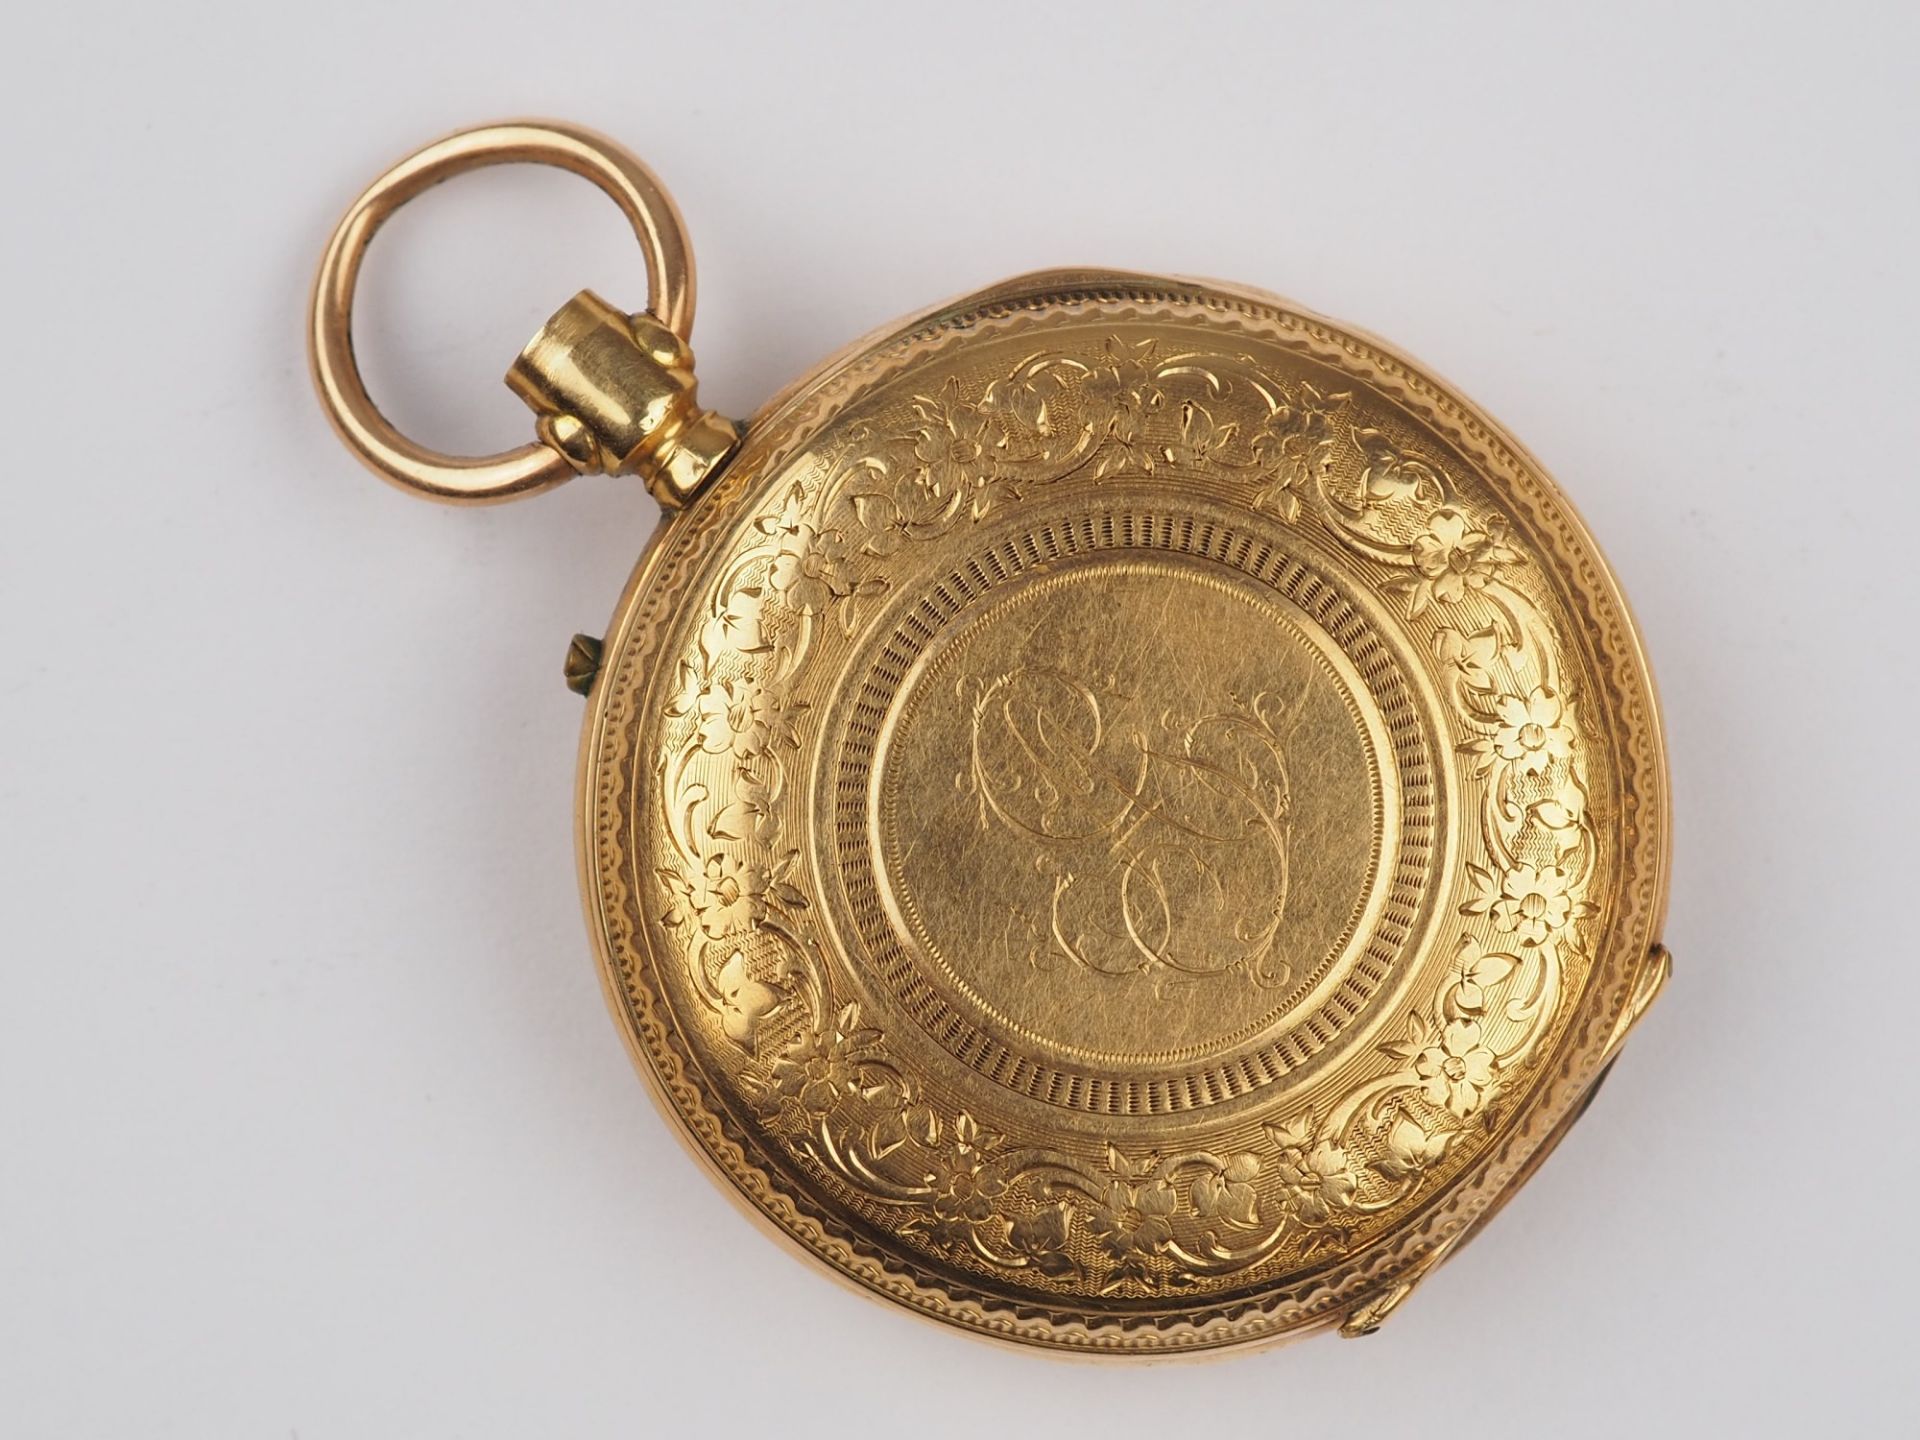 Lady's pocket watch in gold case around 1900 - Image 2 of 4